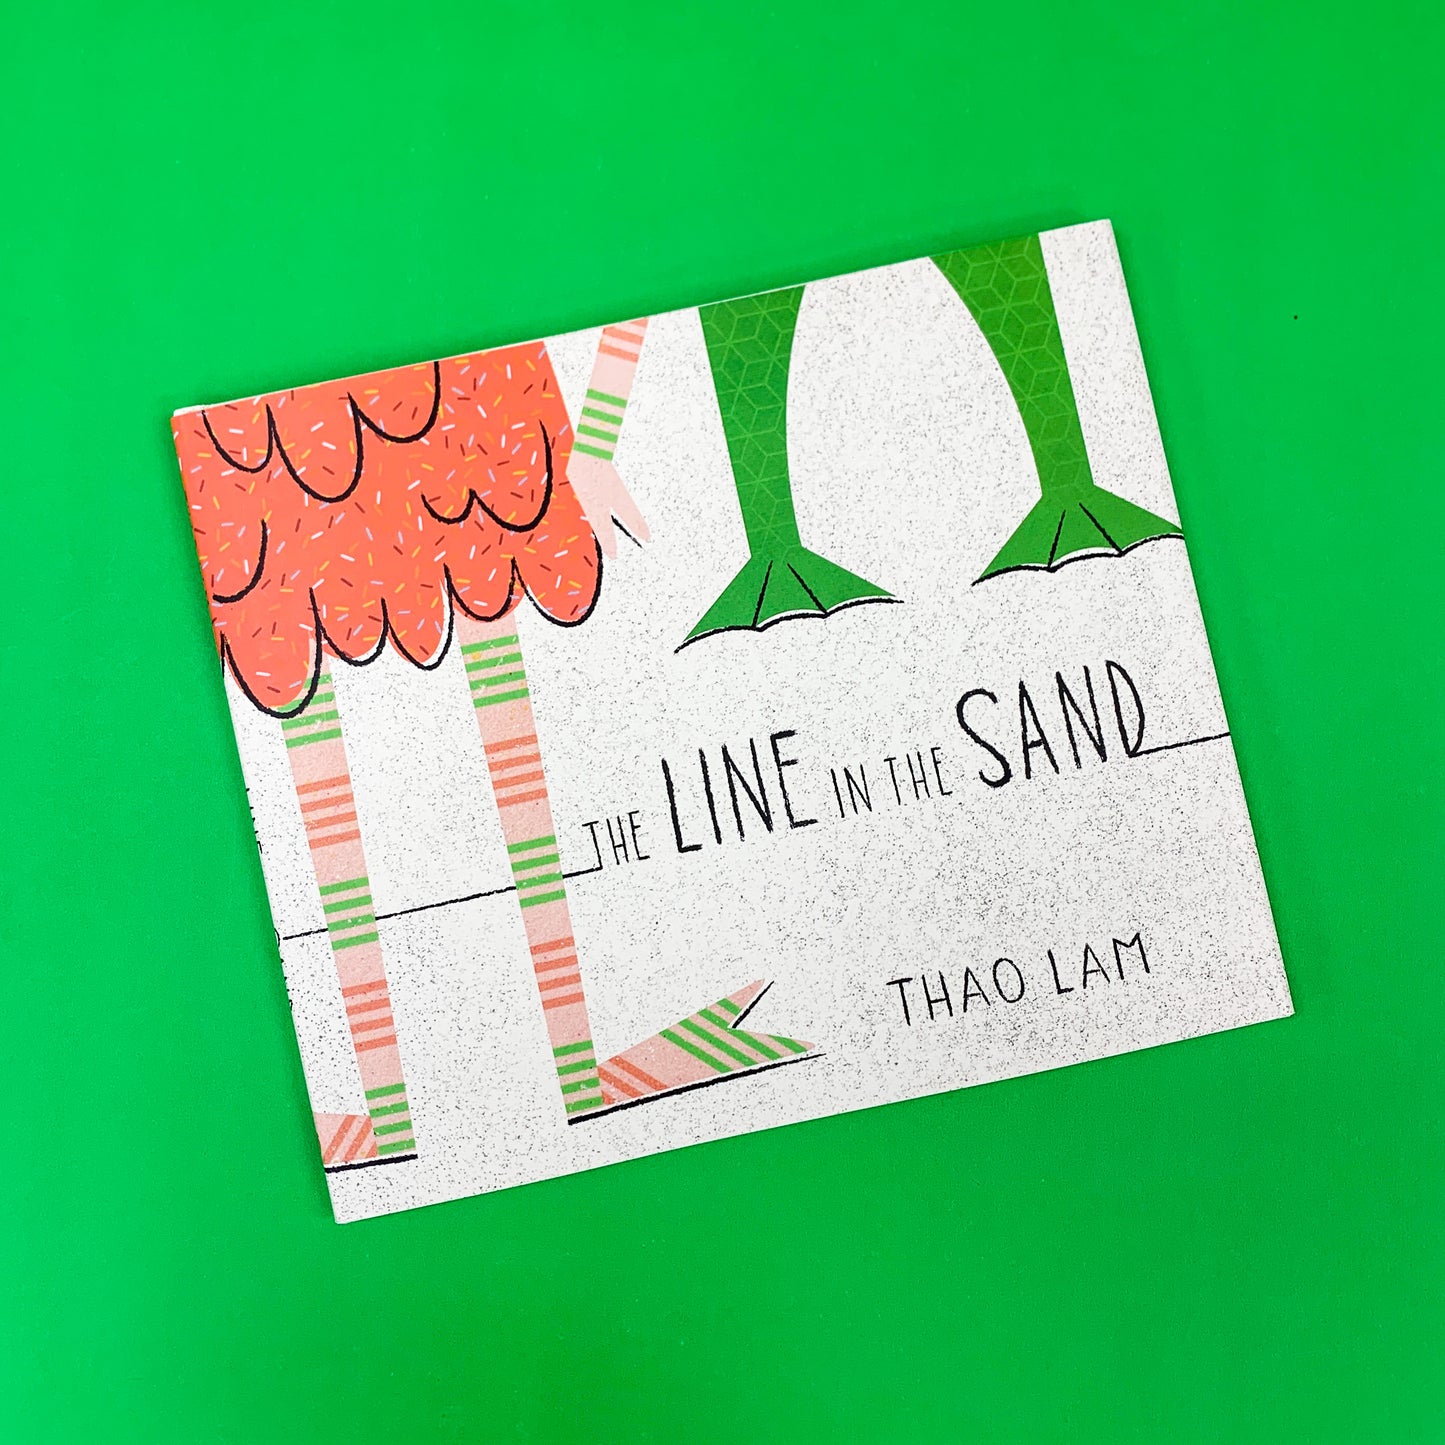 The Line In the Sand